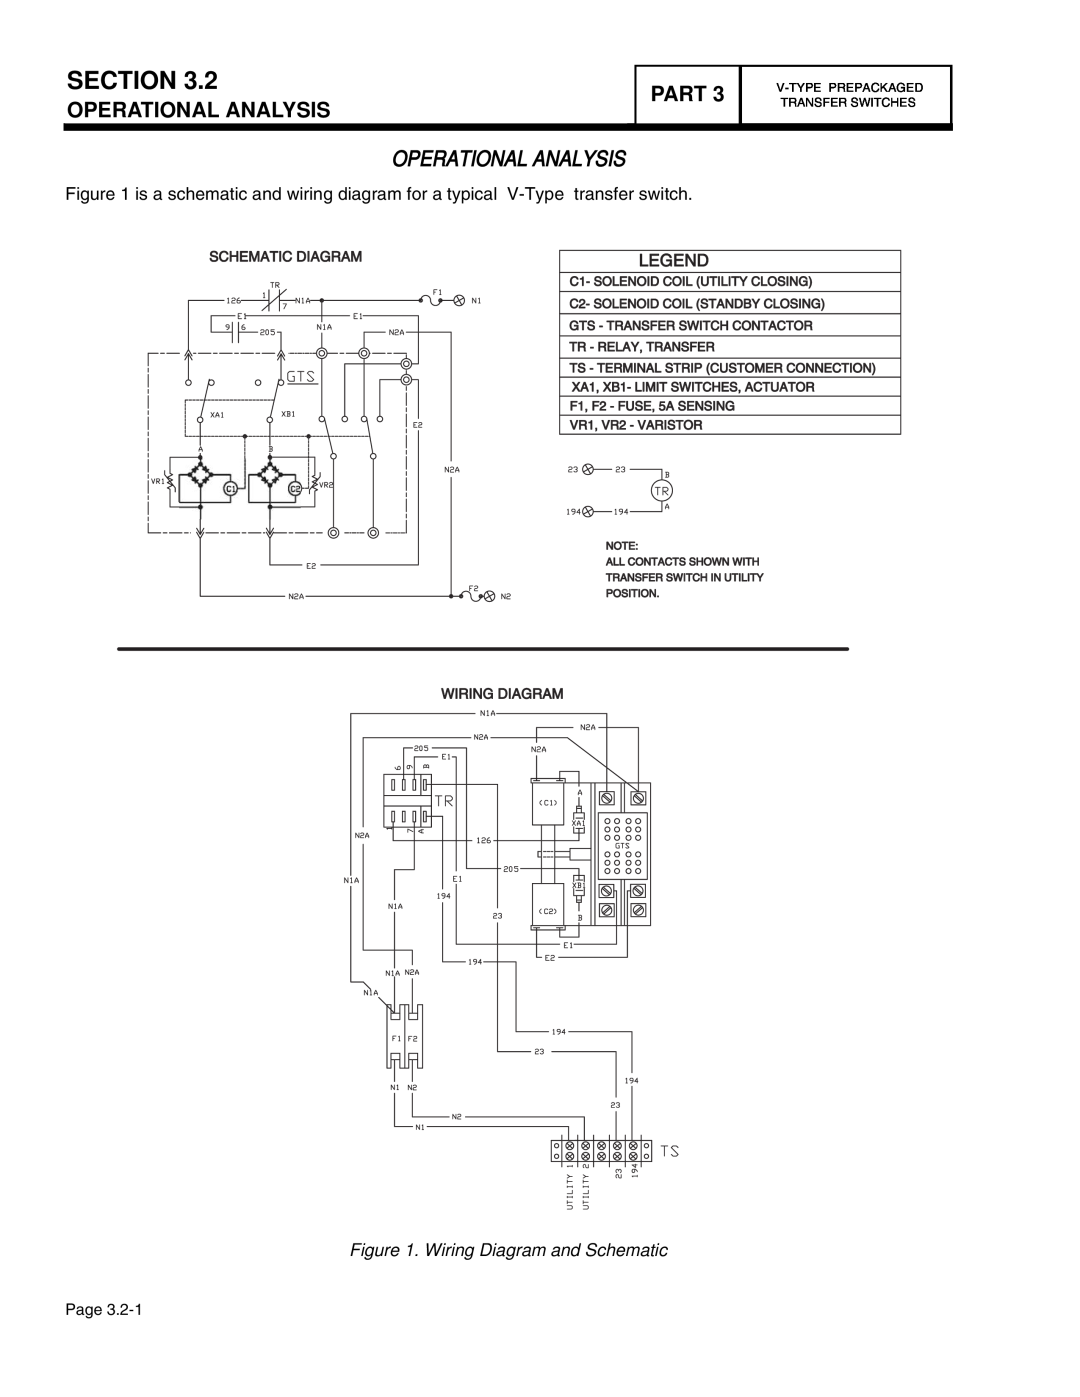 Guardian Technologies 4760, 4456, 4390, 4389, 4759, 4758 Operational Analysis, Section, Part, Wiring Diagram and Schematic 